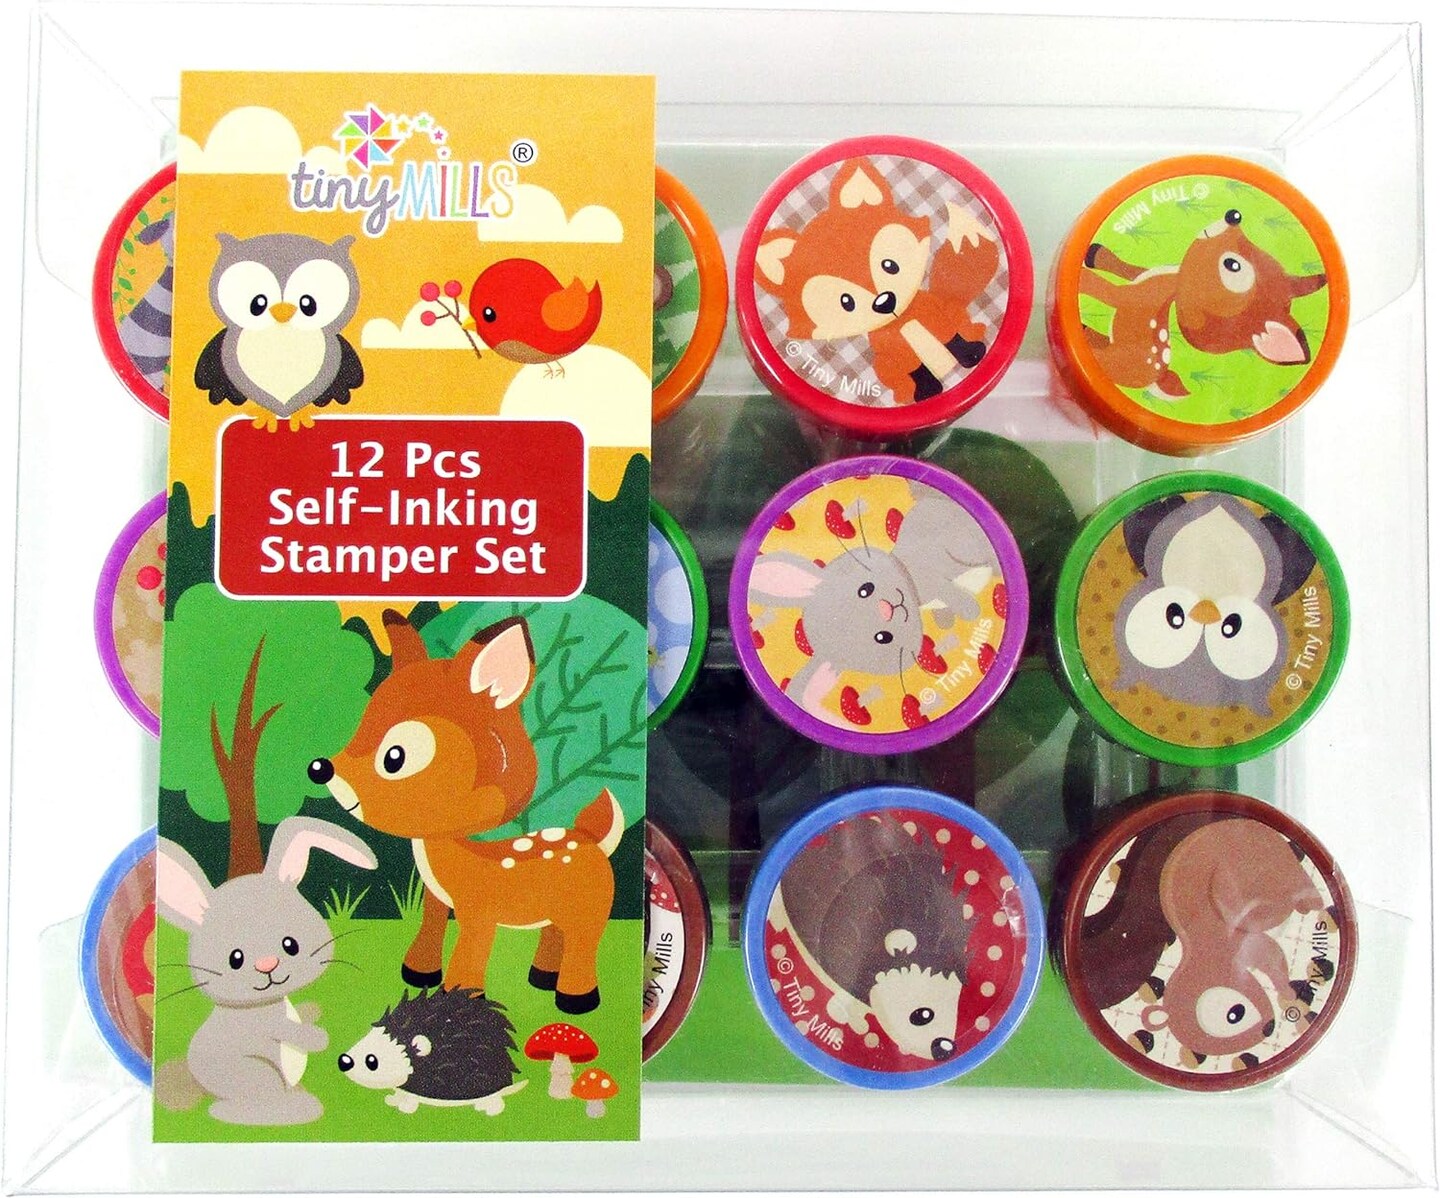 TINYMILLS 12 Pcs Woodland Animals Critters Stamp Kit for Kids Self Inking Stamps Gift Party Favors